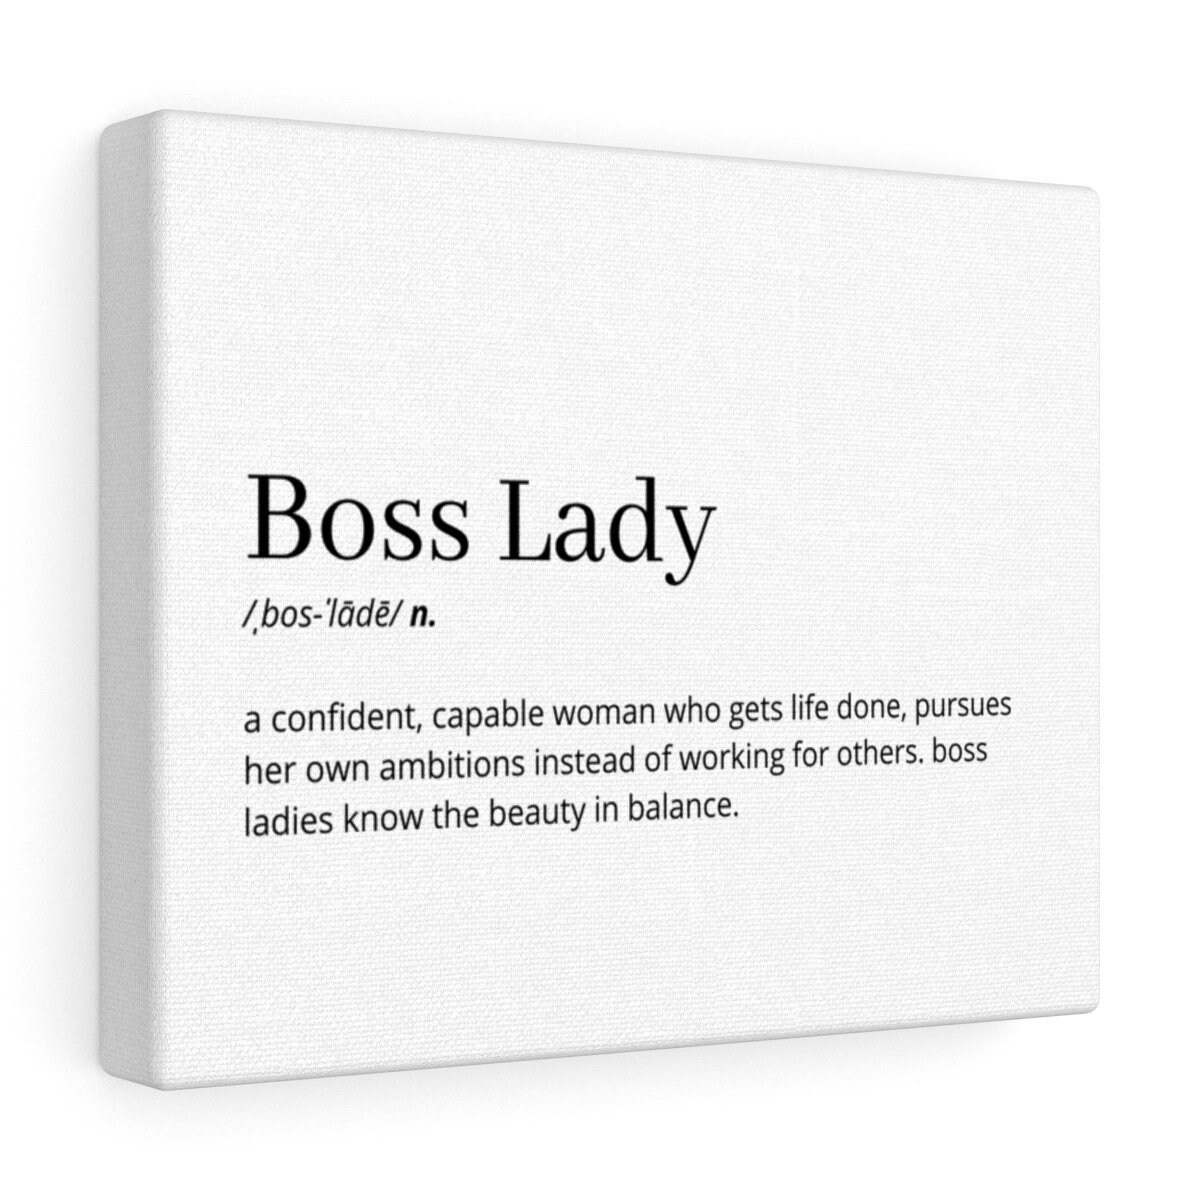 Boss Lady Printable Lady Wall Babe Printable Wall Boss Decor, Decor, Boss Boss Girl Print, Art, Etsy - Print, Office Feminist Definition Lady Boss